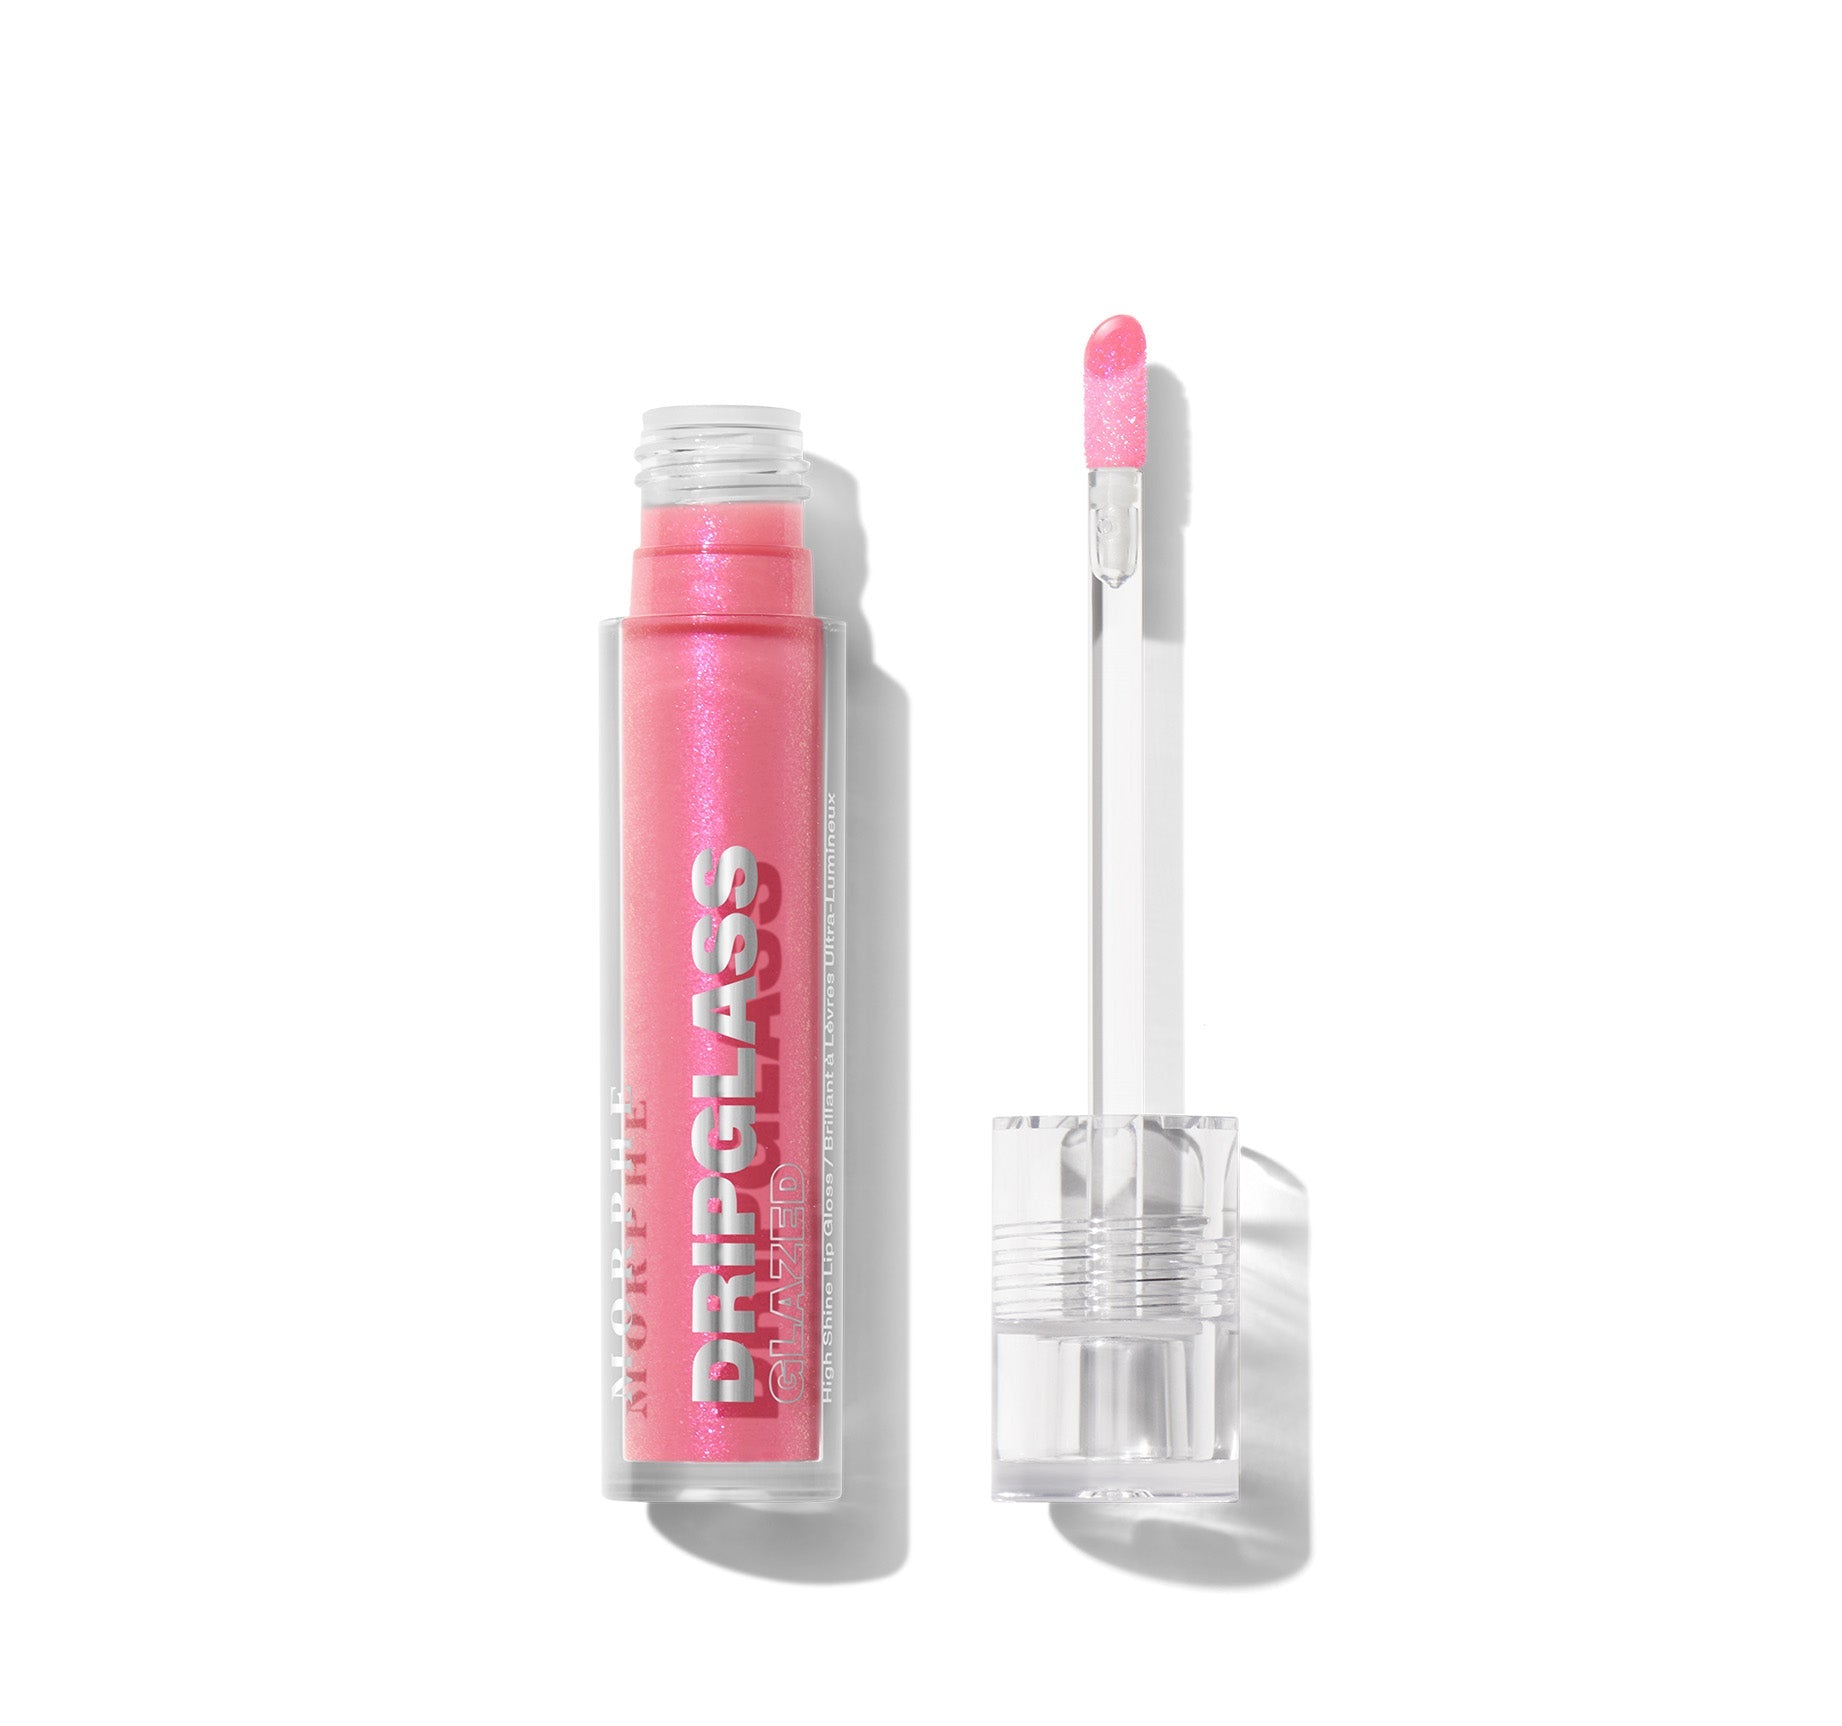 Dripglass Glazed High Shine Lip Gloss - Opalescent Orchid - Image 1